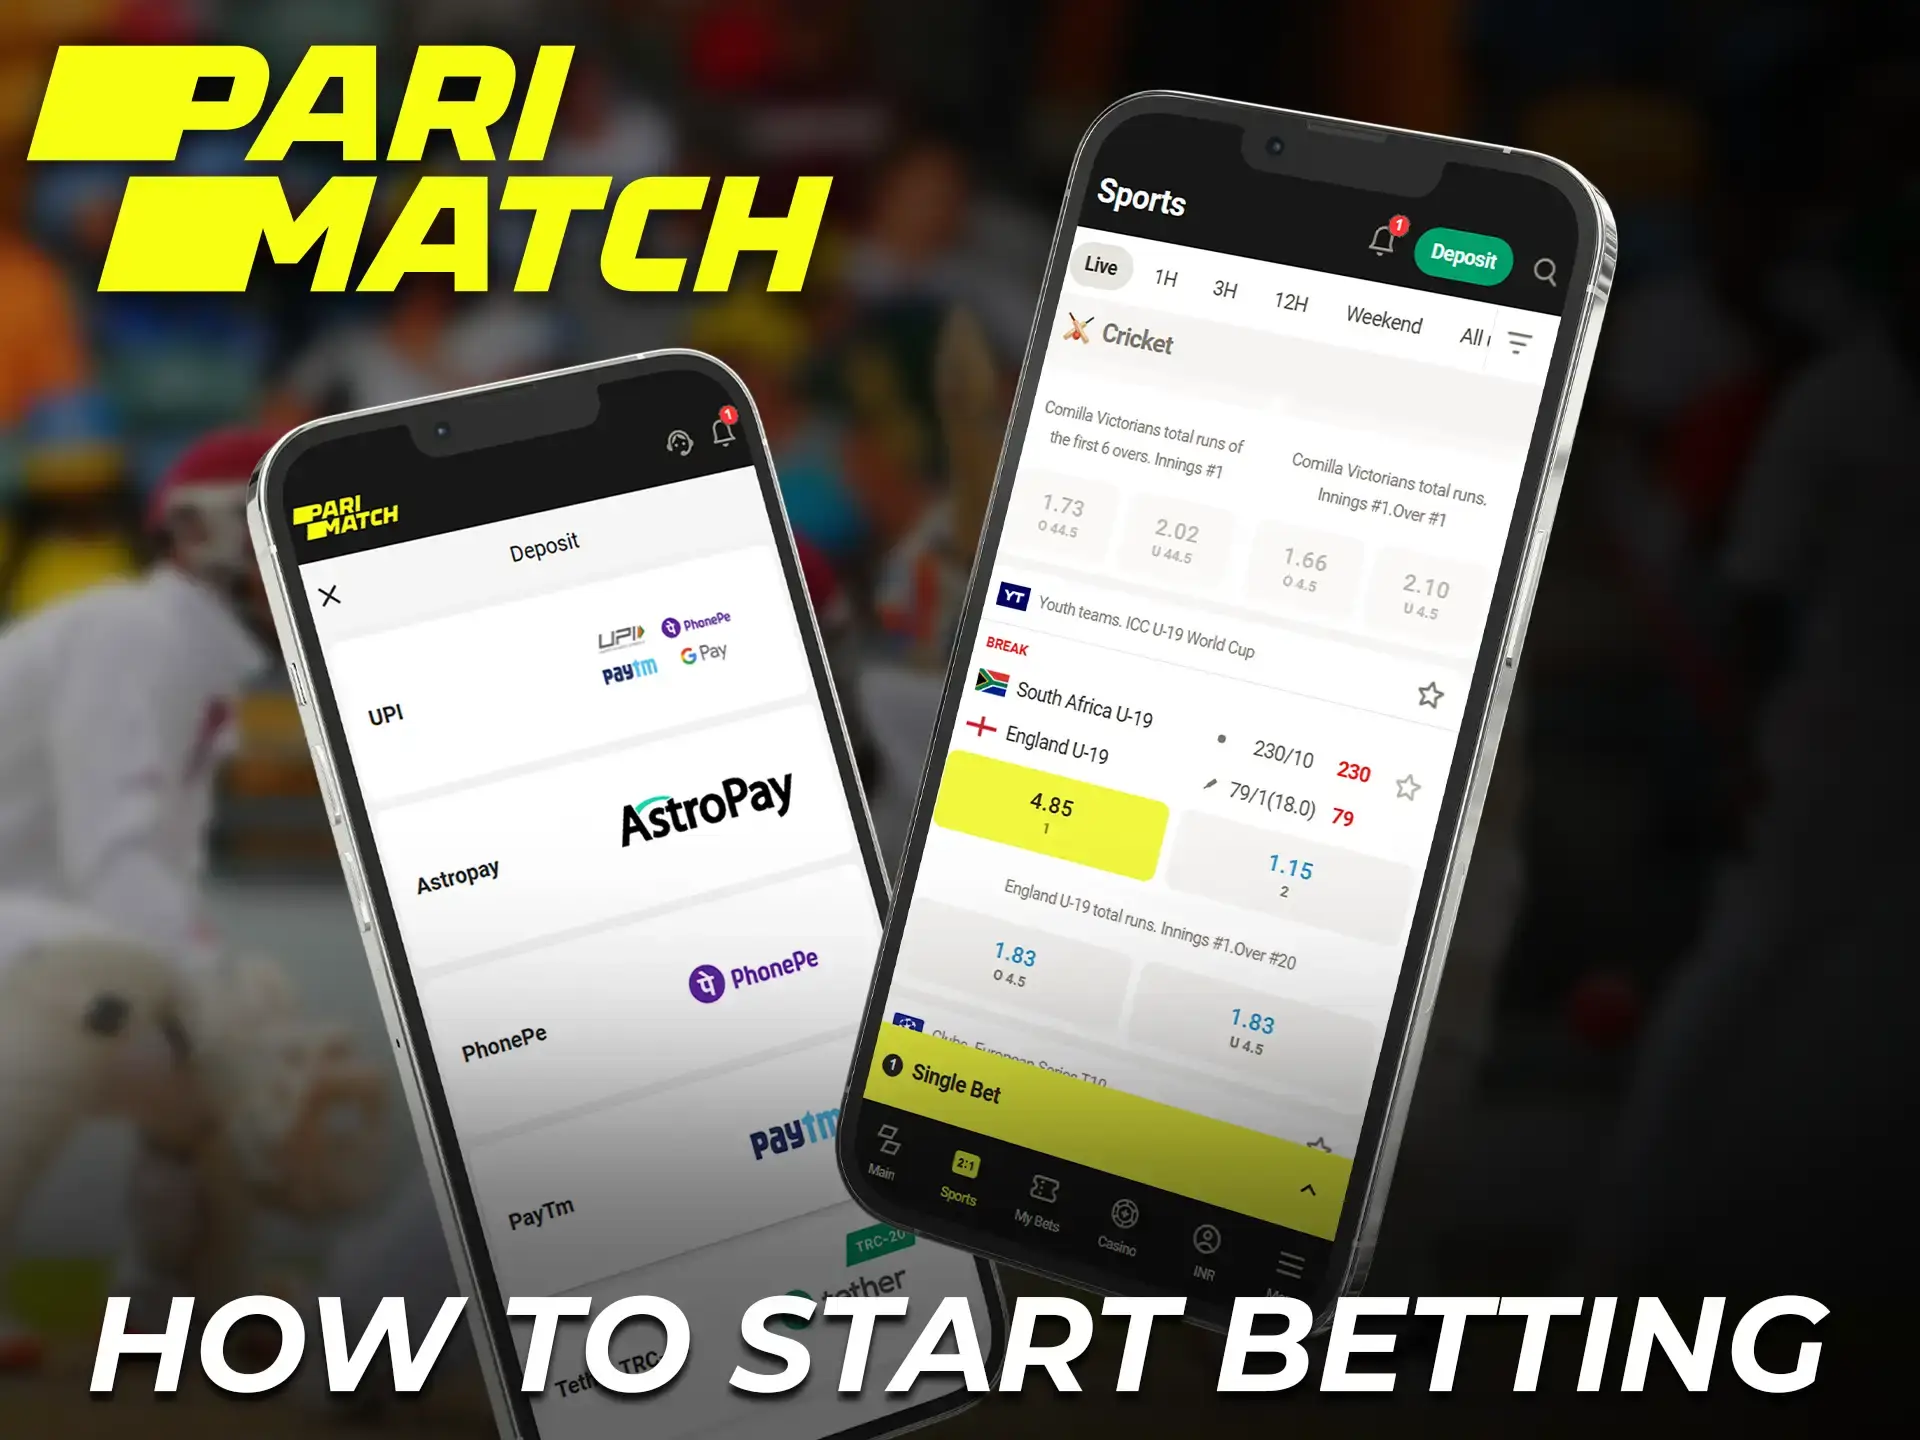 Read the instructions to properly start betting in the Parimatch mobile app.